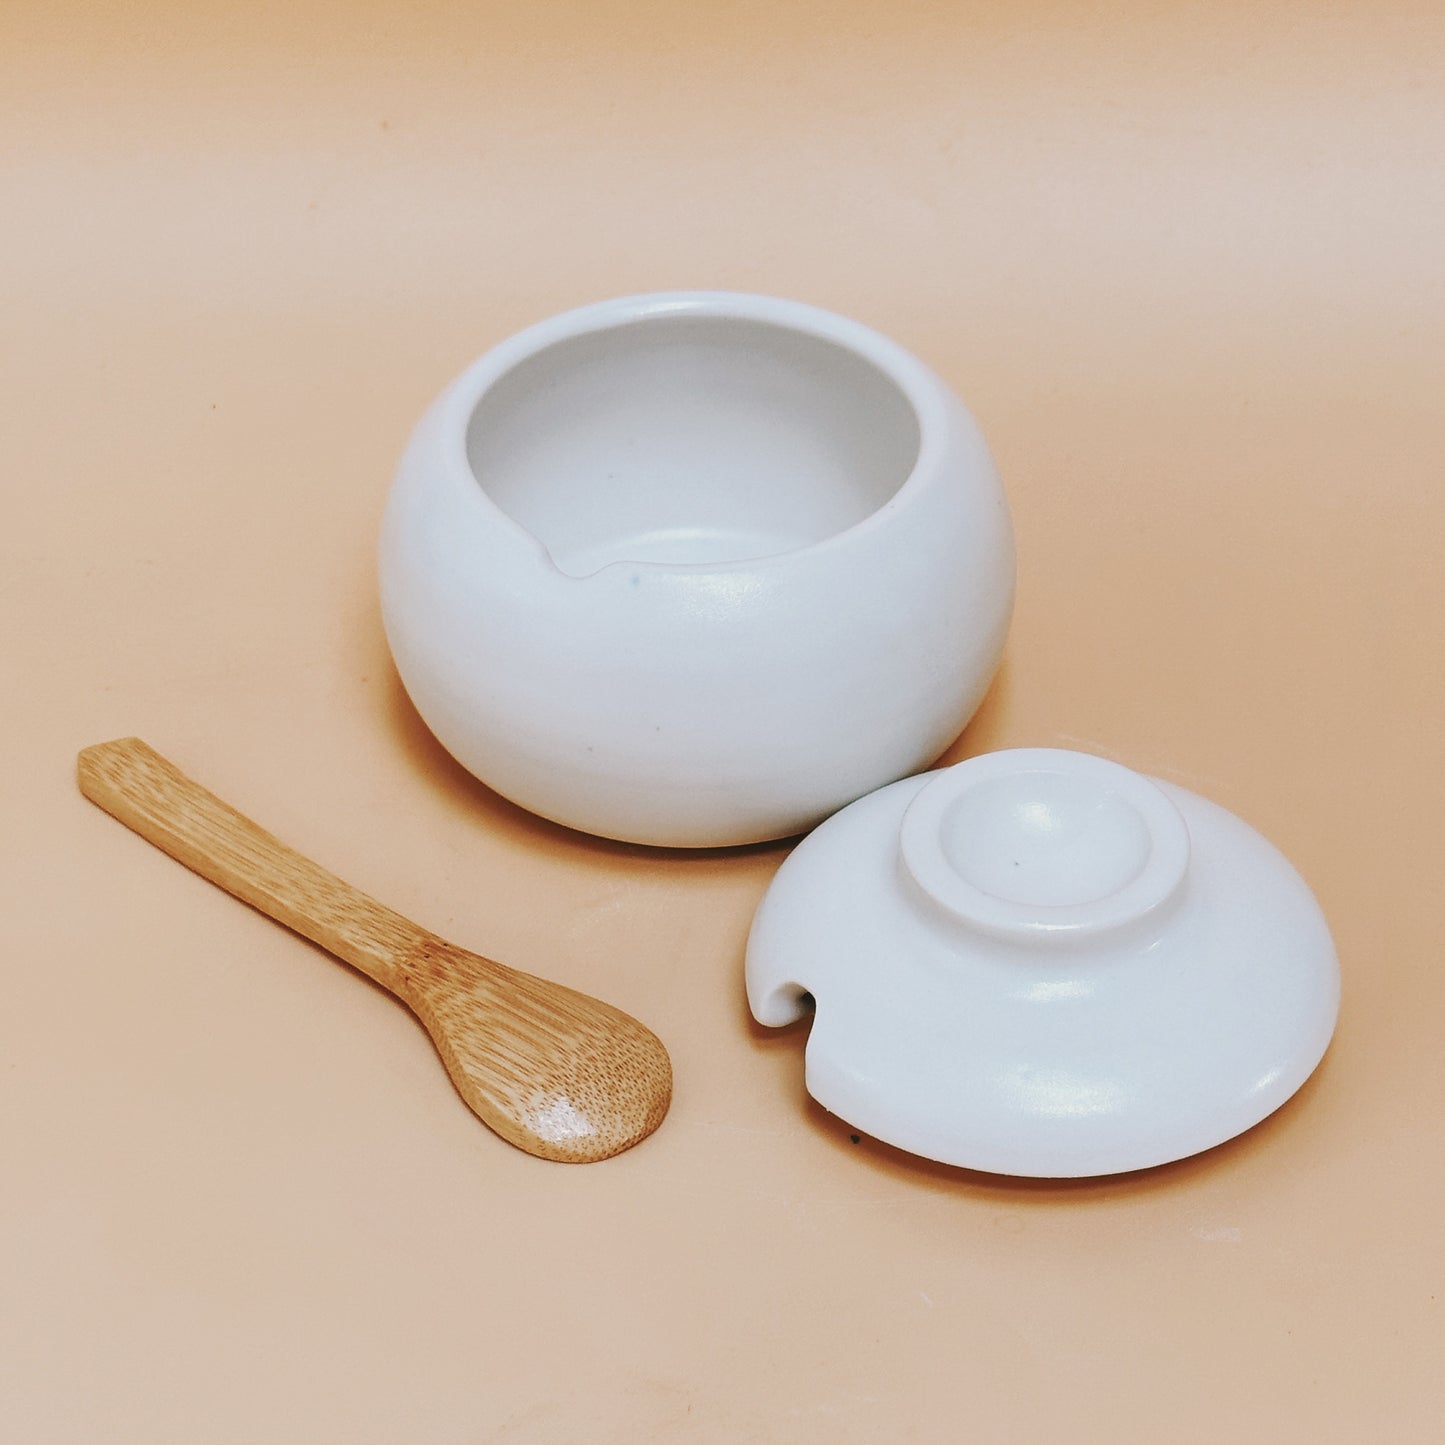 Lidded Rounded Cellar with spoon